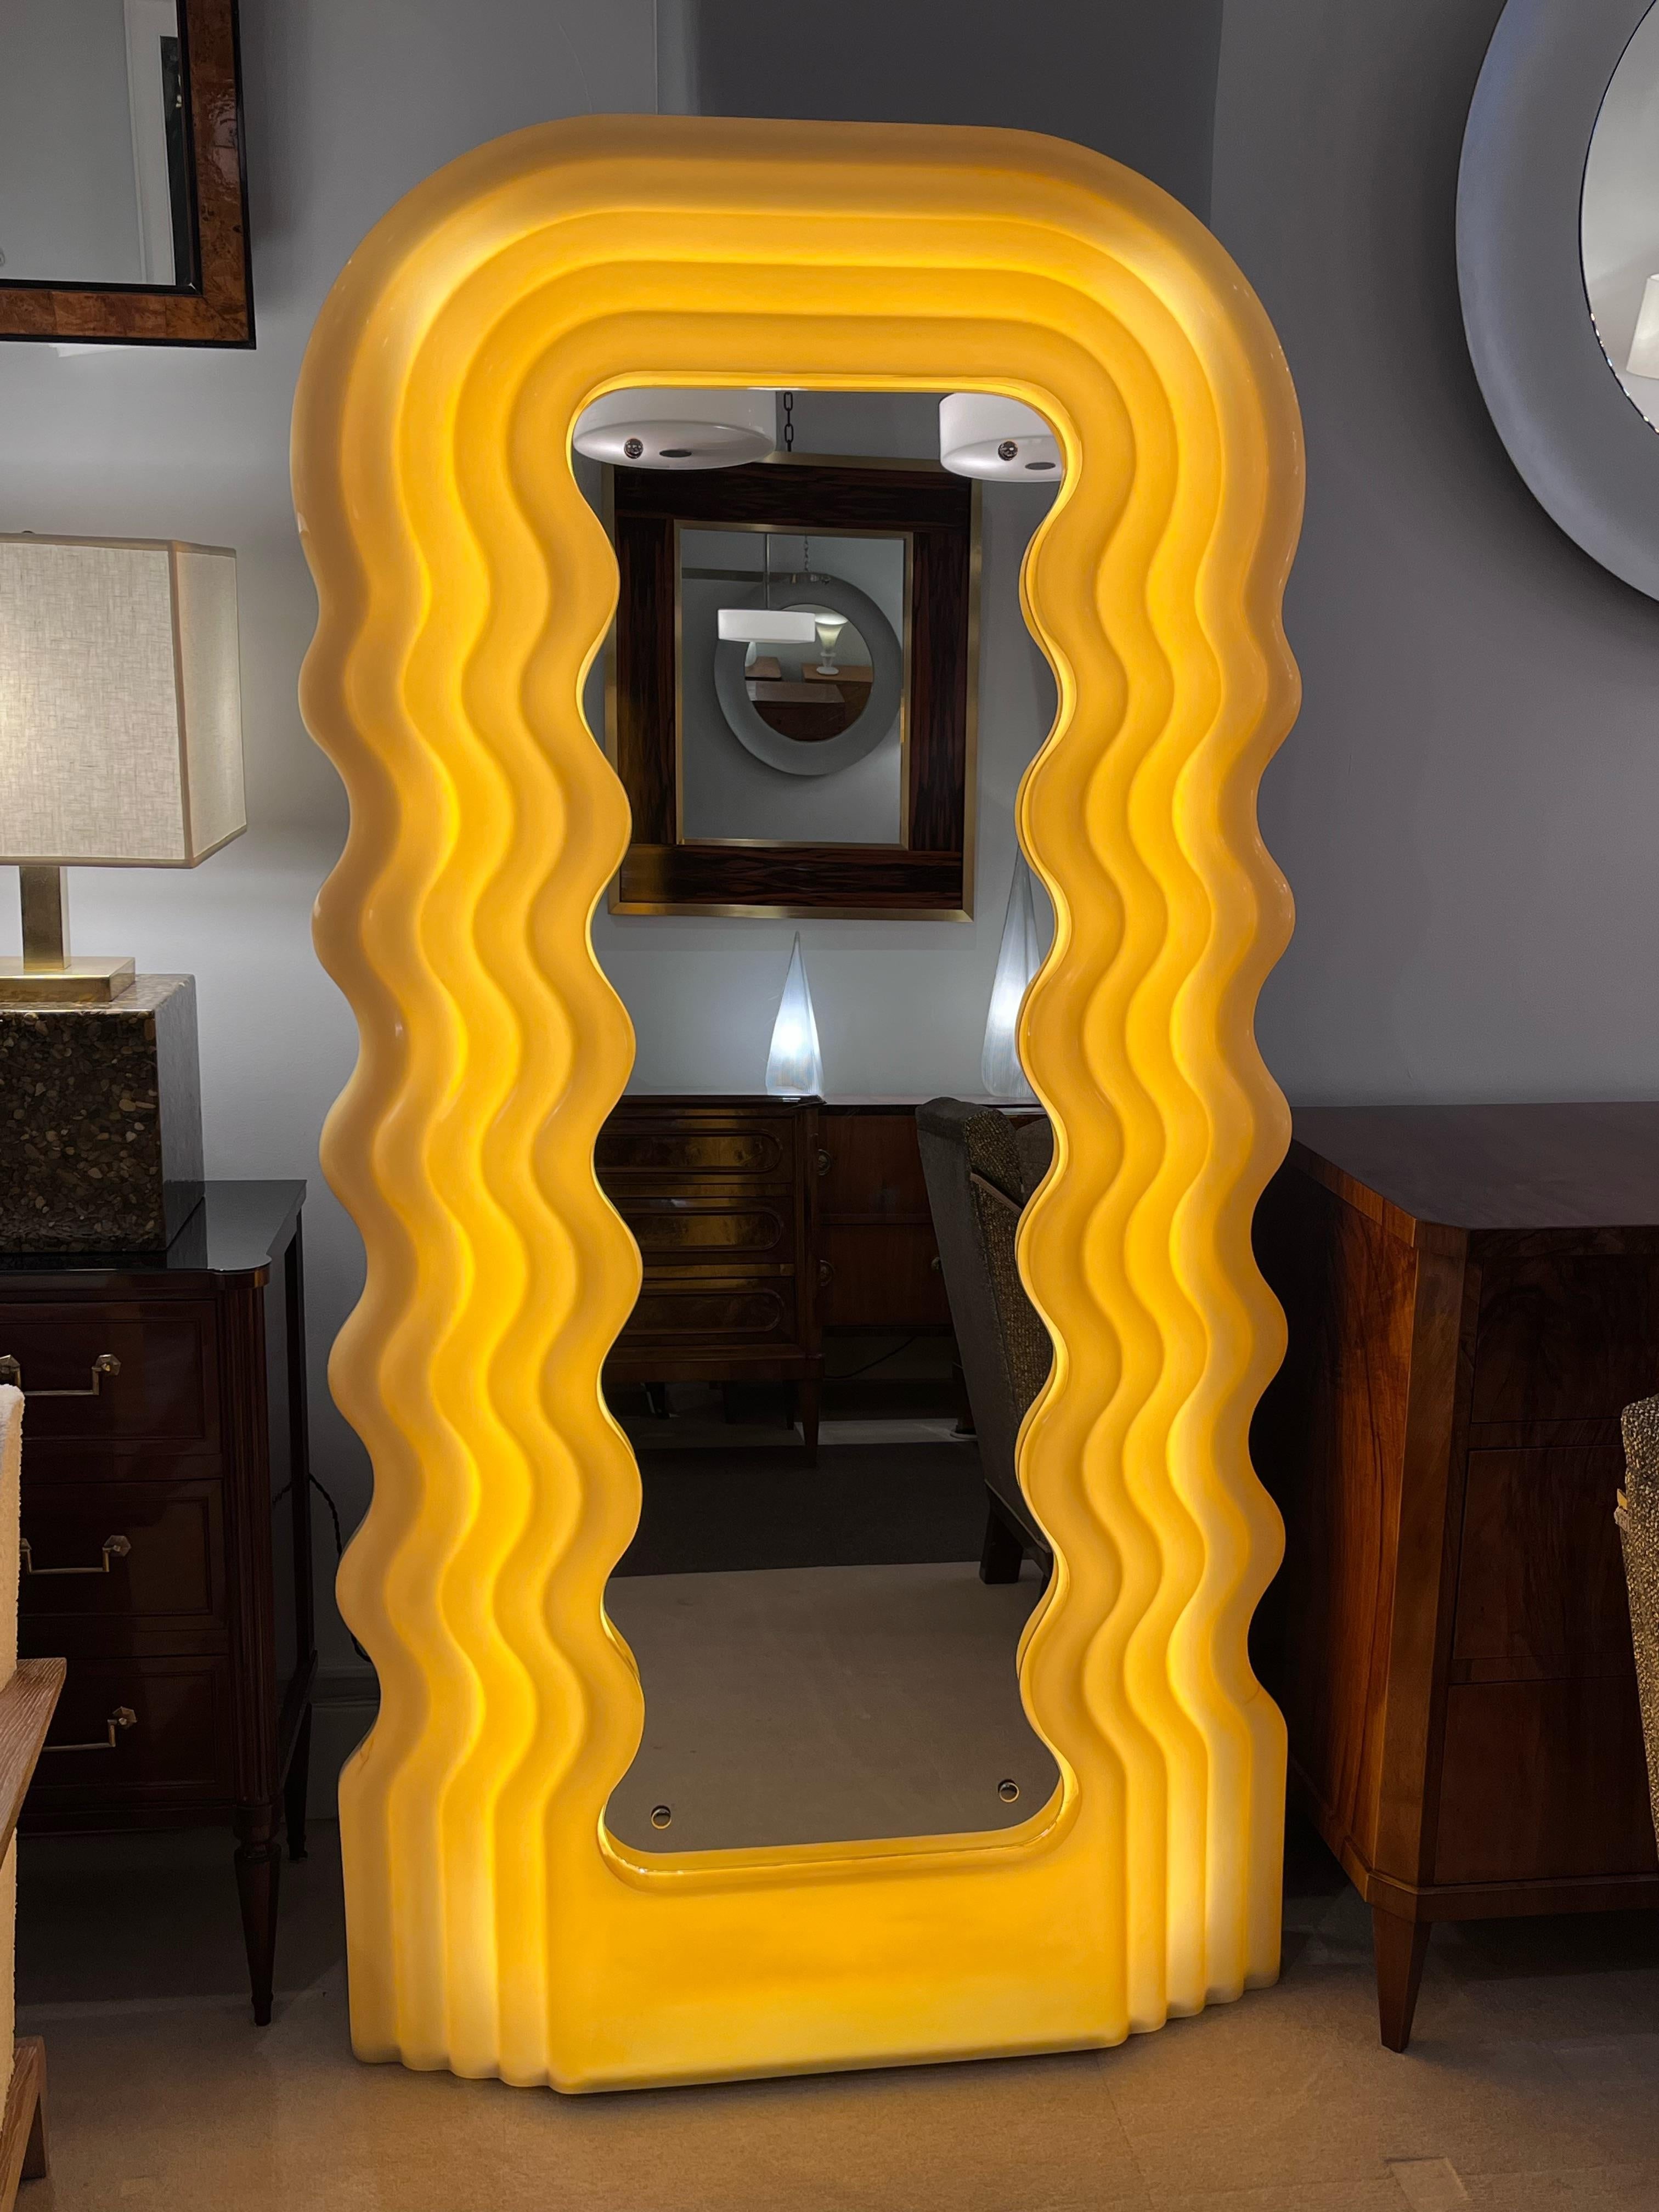 Original 1st edition model of the Ultrafragola Mirror designed by Ettore Sottsass for Poltronova. Light up mirror with acrylic shell made of layered waves around the central mirror which mimics the same wavy design. original 1st edition model.